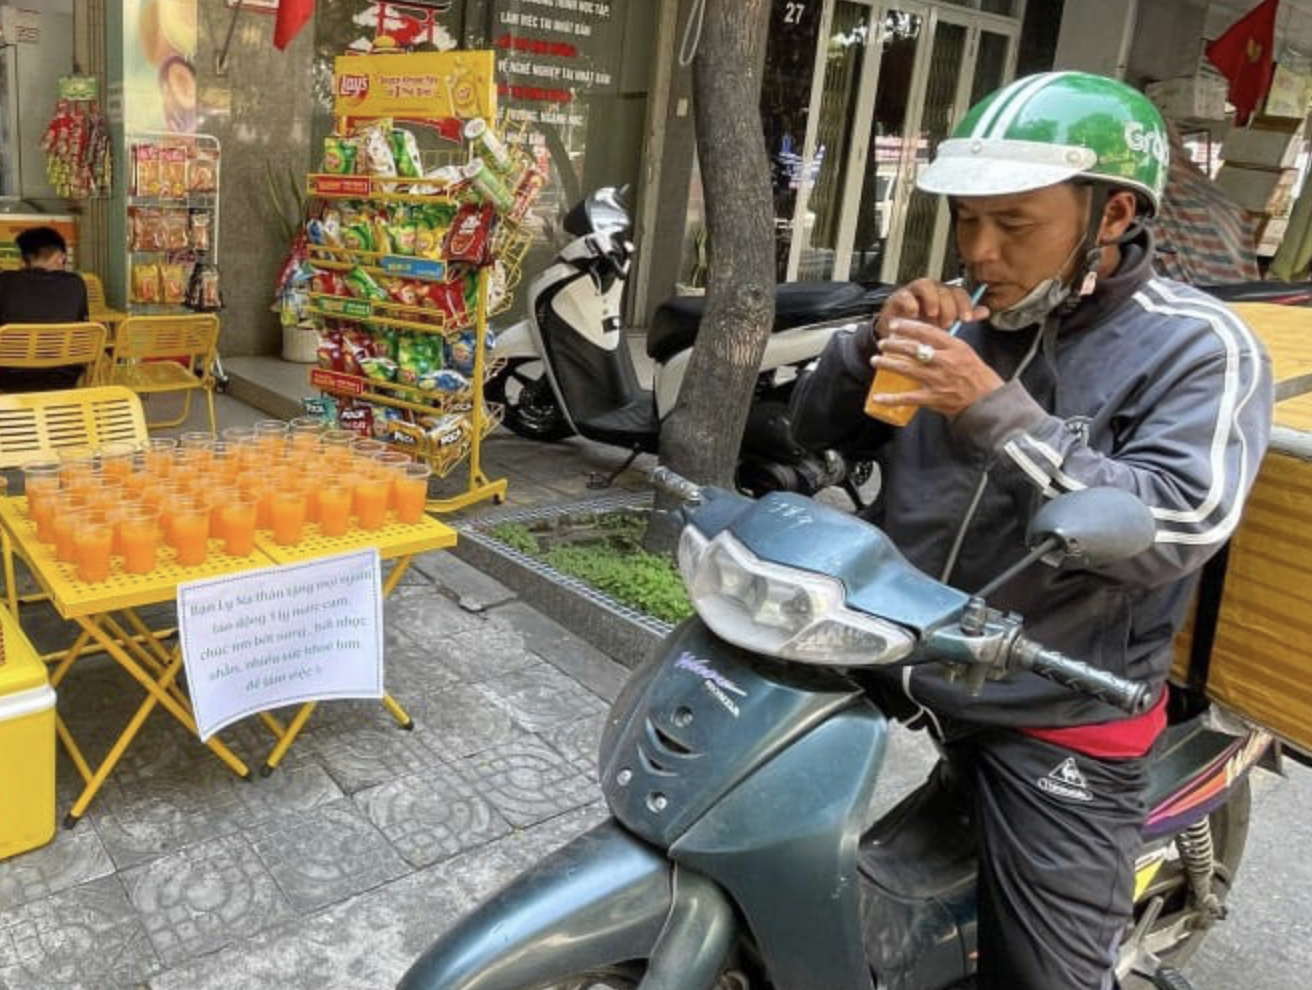 A delivery worker stops to drink a free glass of orange juice in front of a store in Da Nang City